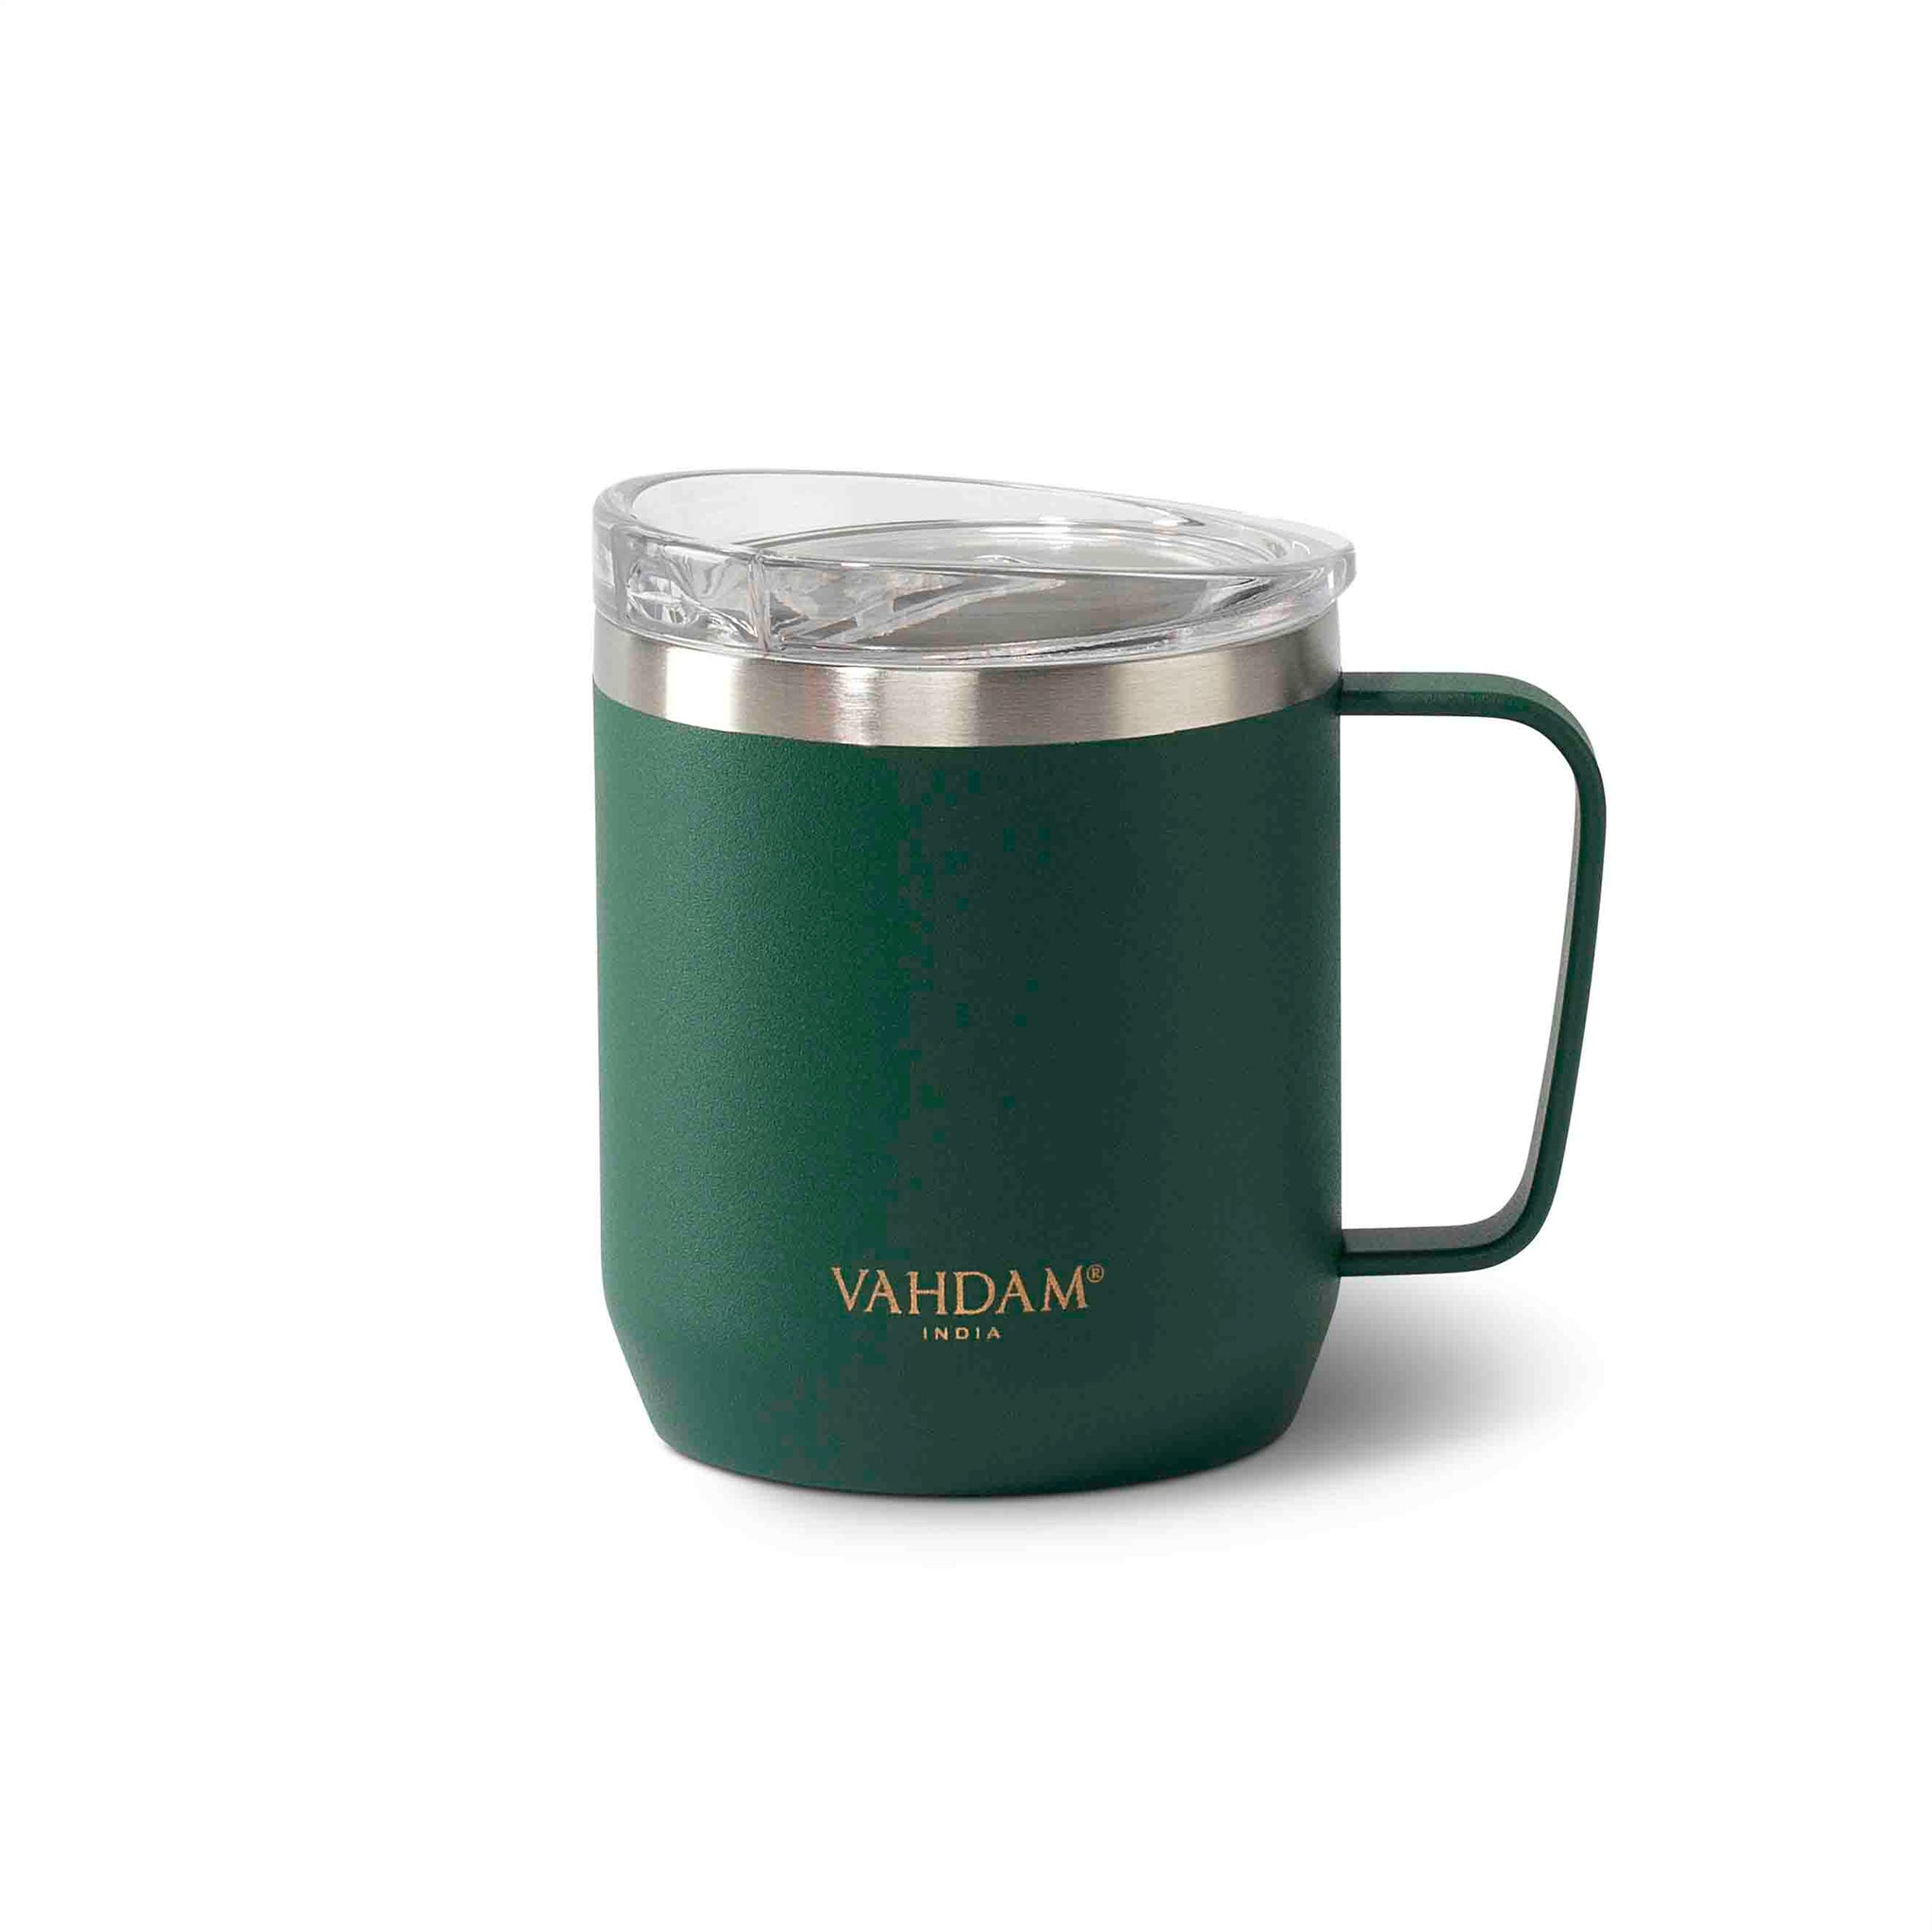 Vahdam, Stainless Steel Coffee Mug with Handle (300ml/10.1oz) - Green | Vacuum Insulated, Double Wall, Sweat-proof Mug with Slider Lid for Hot and Co